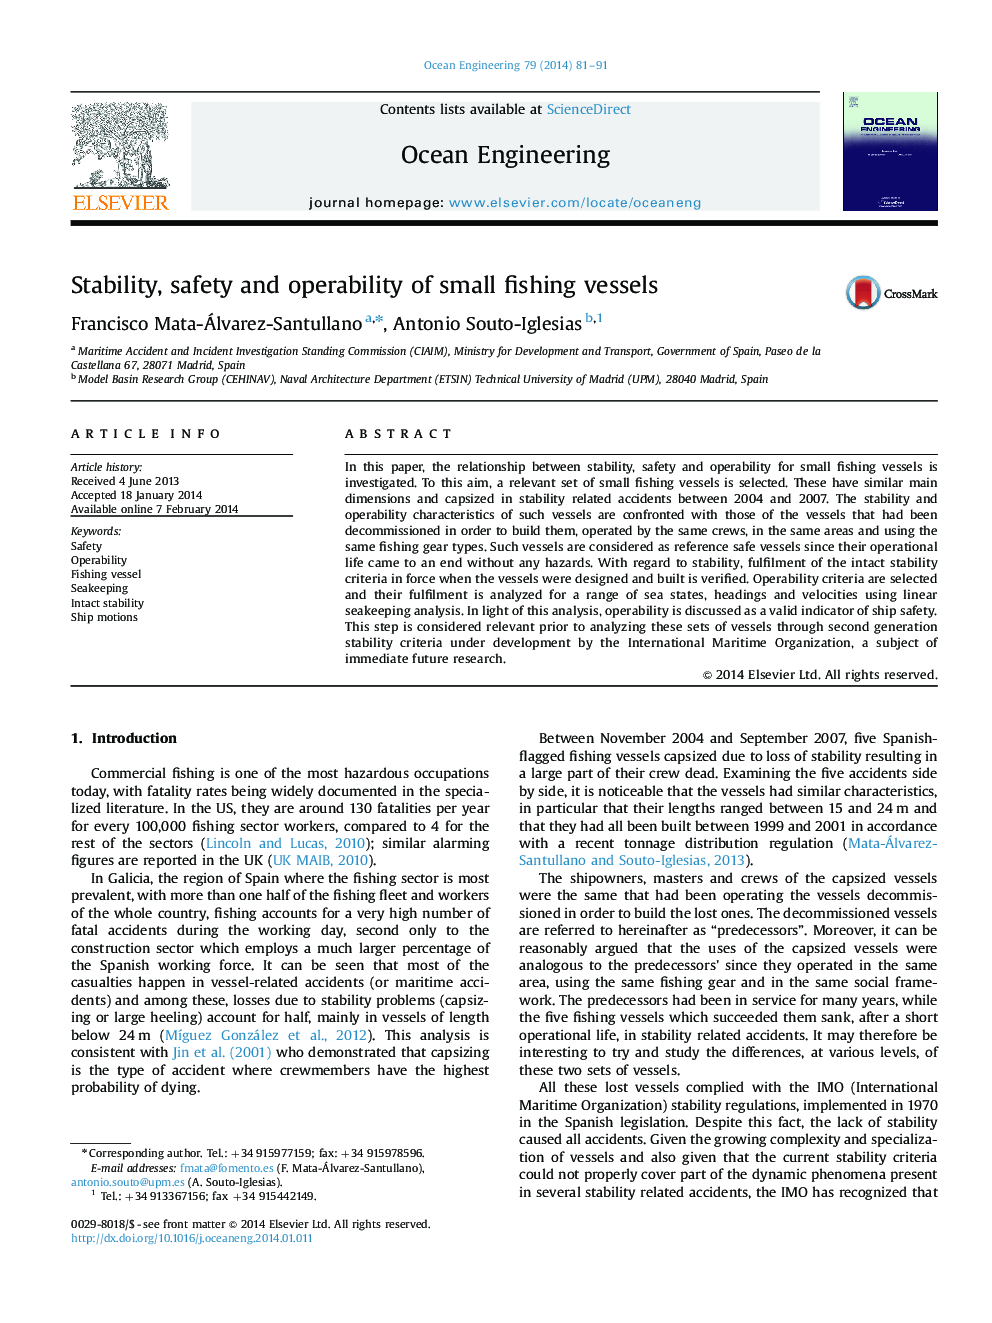 Stability, safety and operability of small fishing vessels